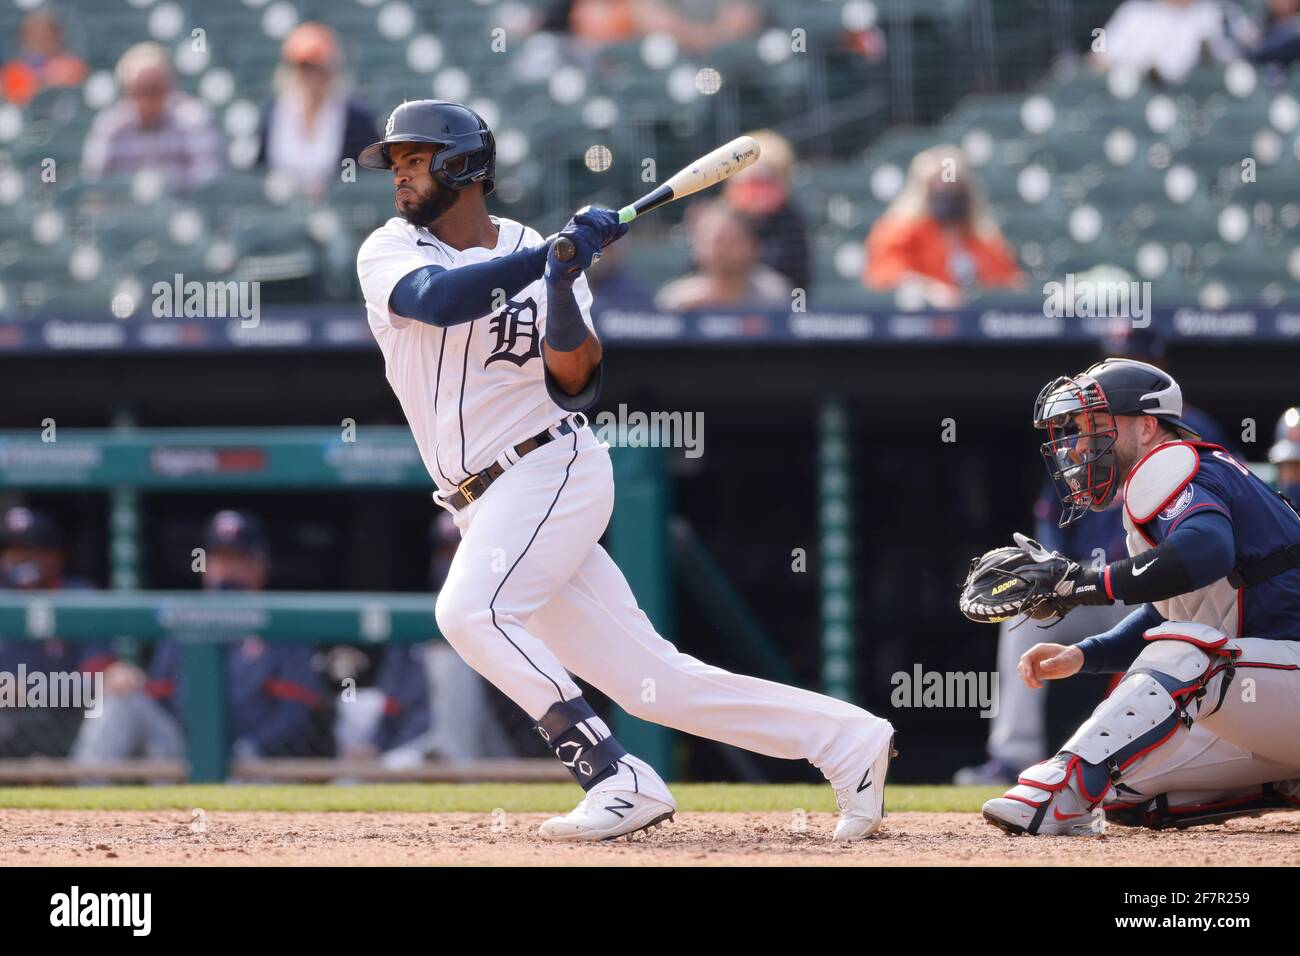 DETROIT, MI - APRIL 6: Willi Castro (9) of the Detroit Tigers bats during a game against the Minnesota Twins at Comerica Park on April 6, 2021 in Detr Stock Photo